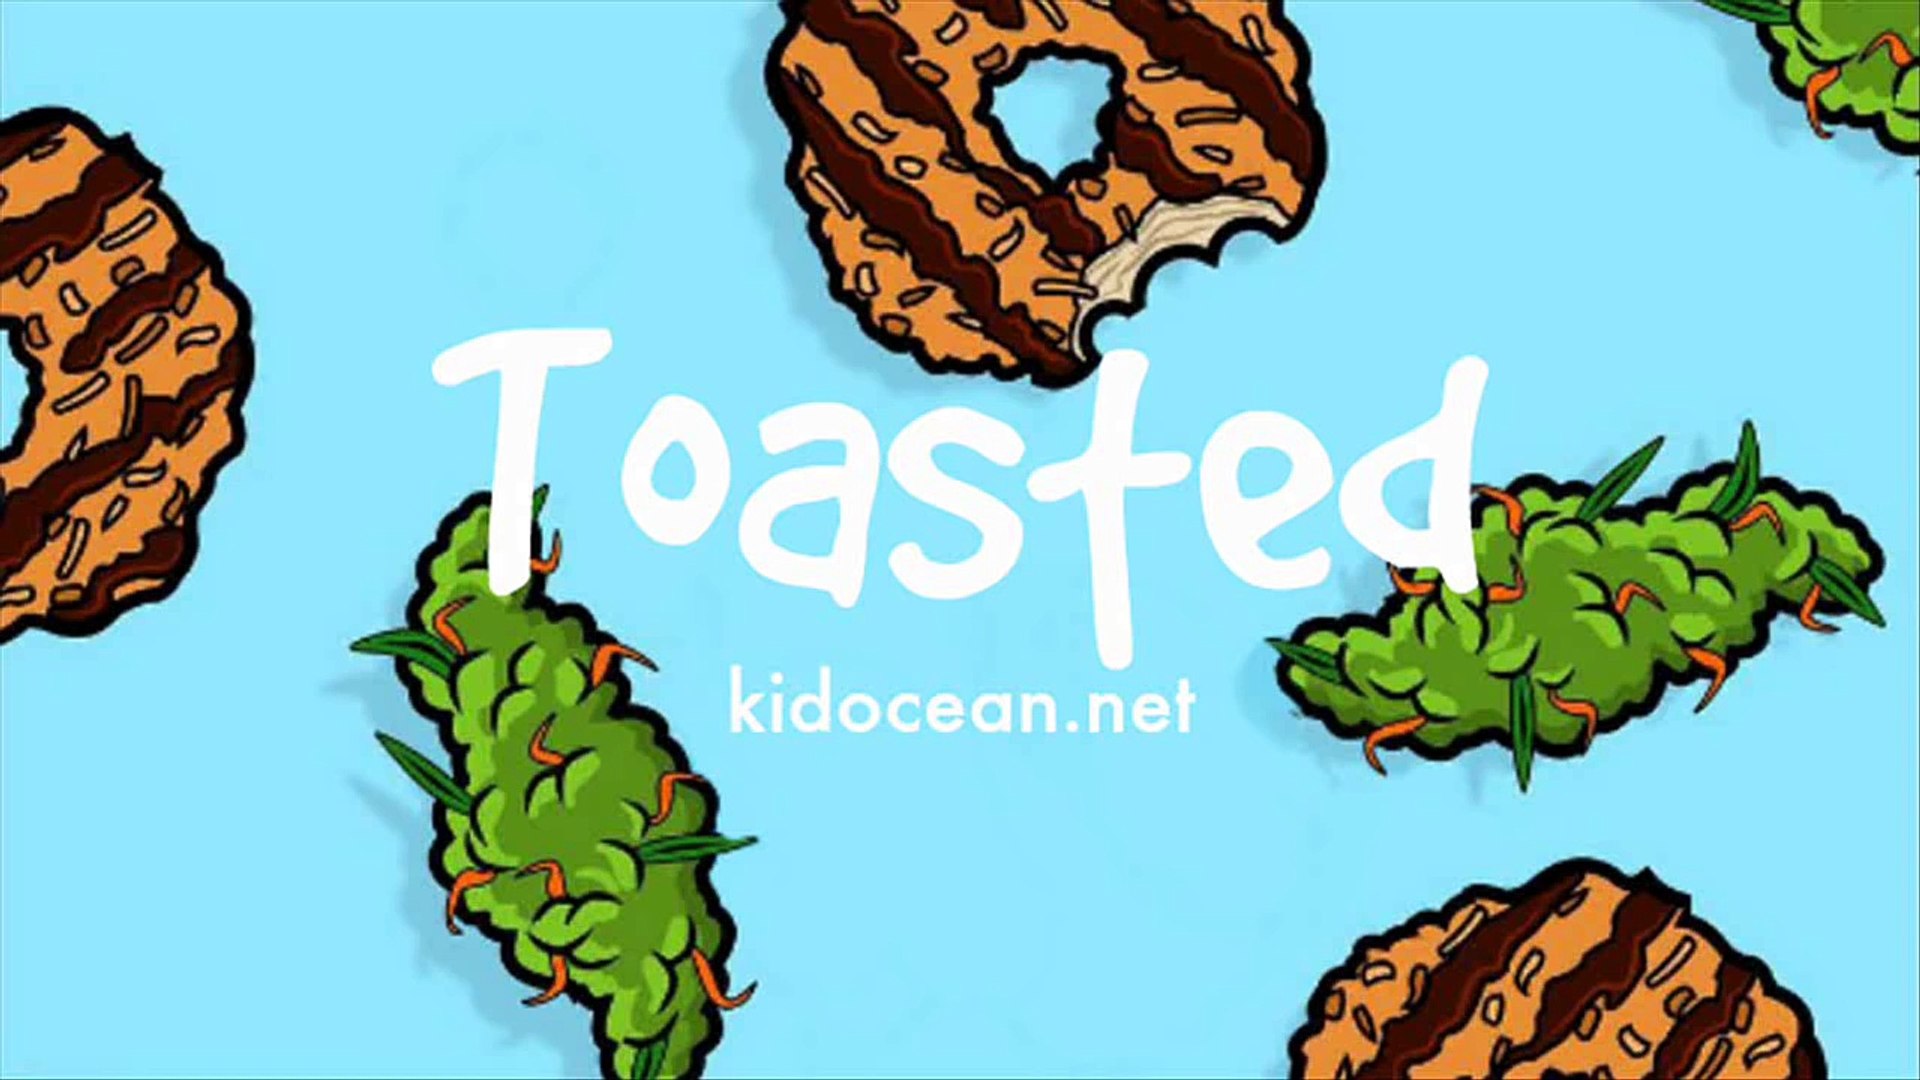 FREE BEAT Madeintyo x Ugly God x Chance the Rapper Type Beat - Toasted